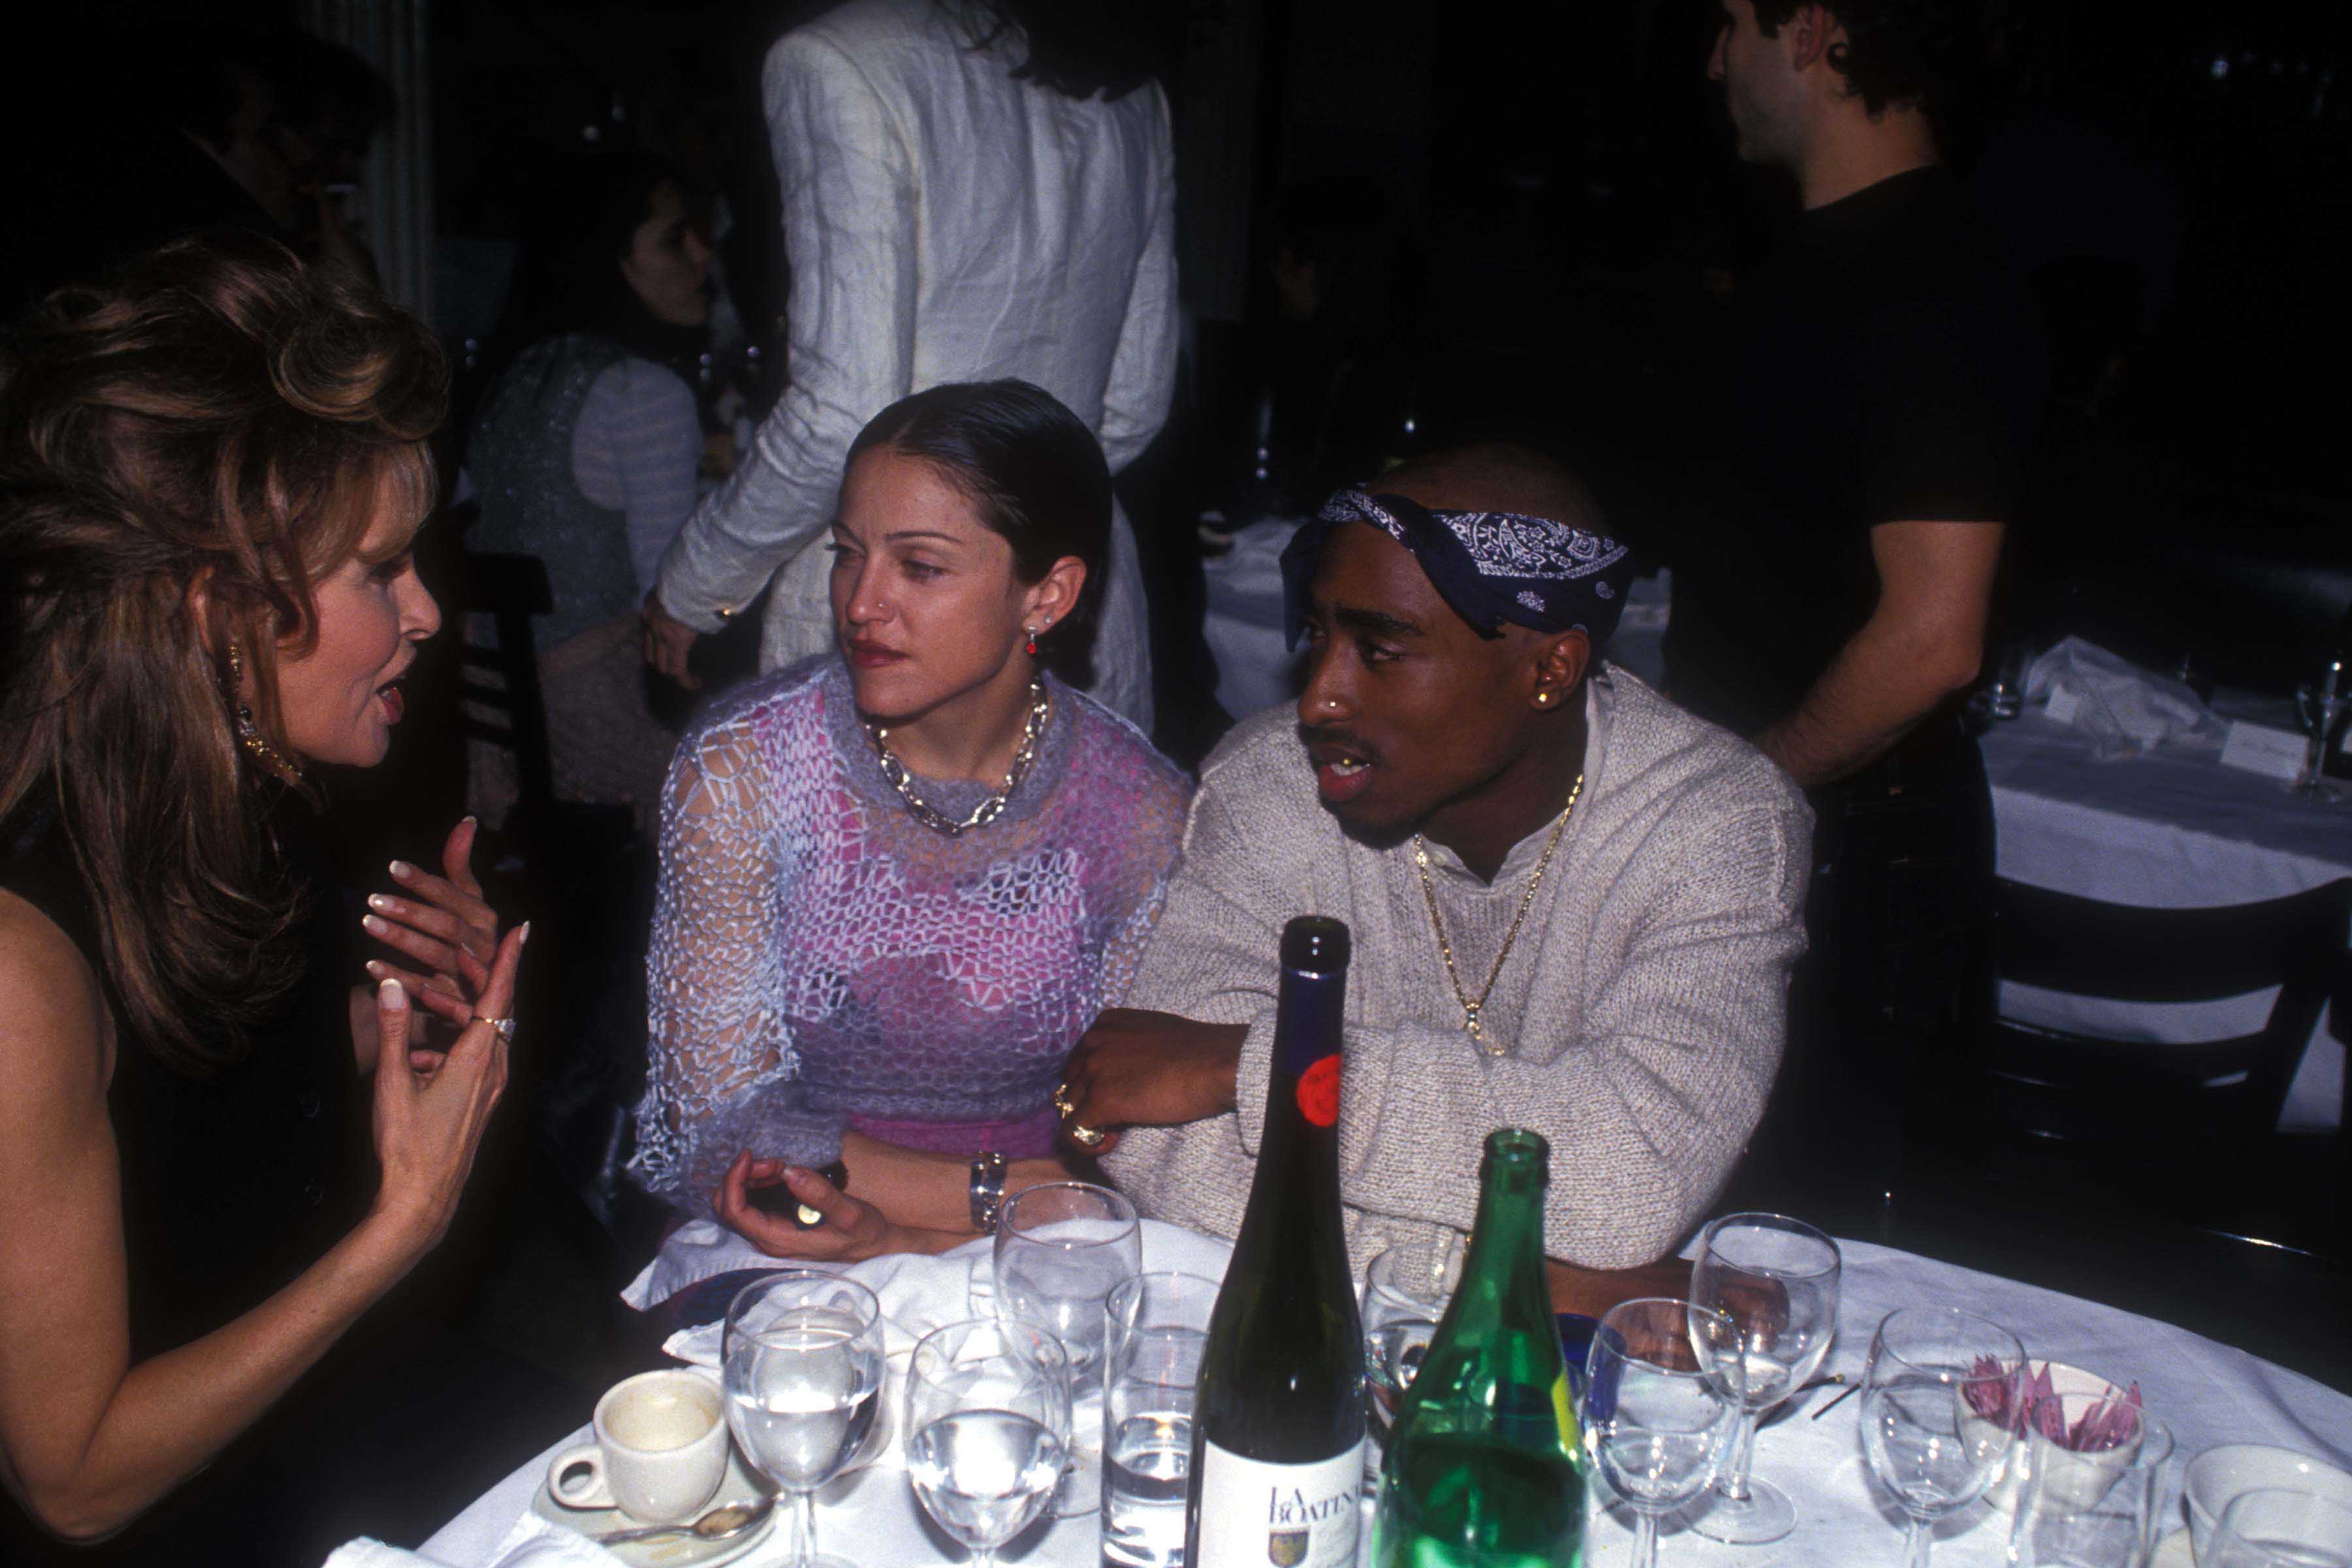 Raquel Welch, Madonna and Tupac Shakur at the Interview Magazine party in March 1, 1994 in New York City. | Photo: GettyImages